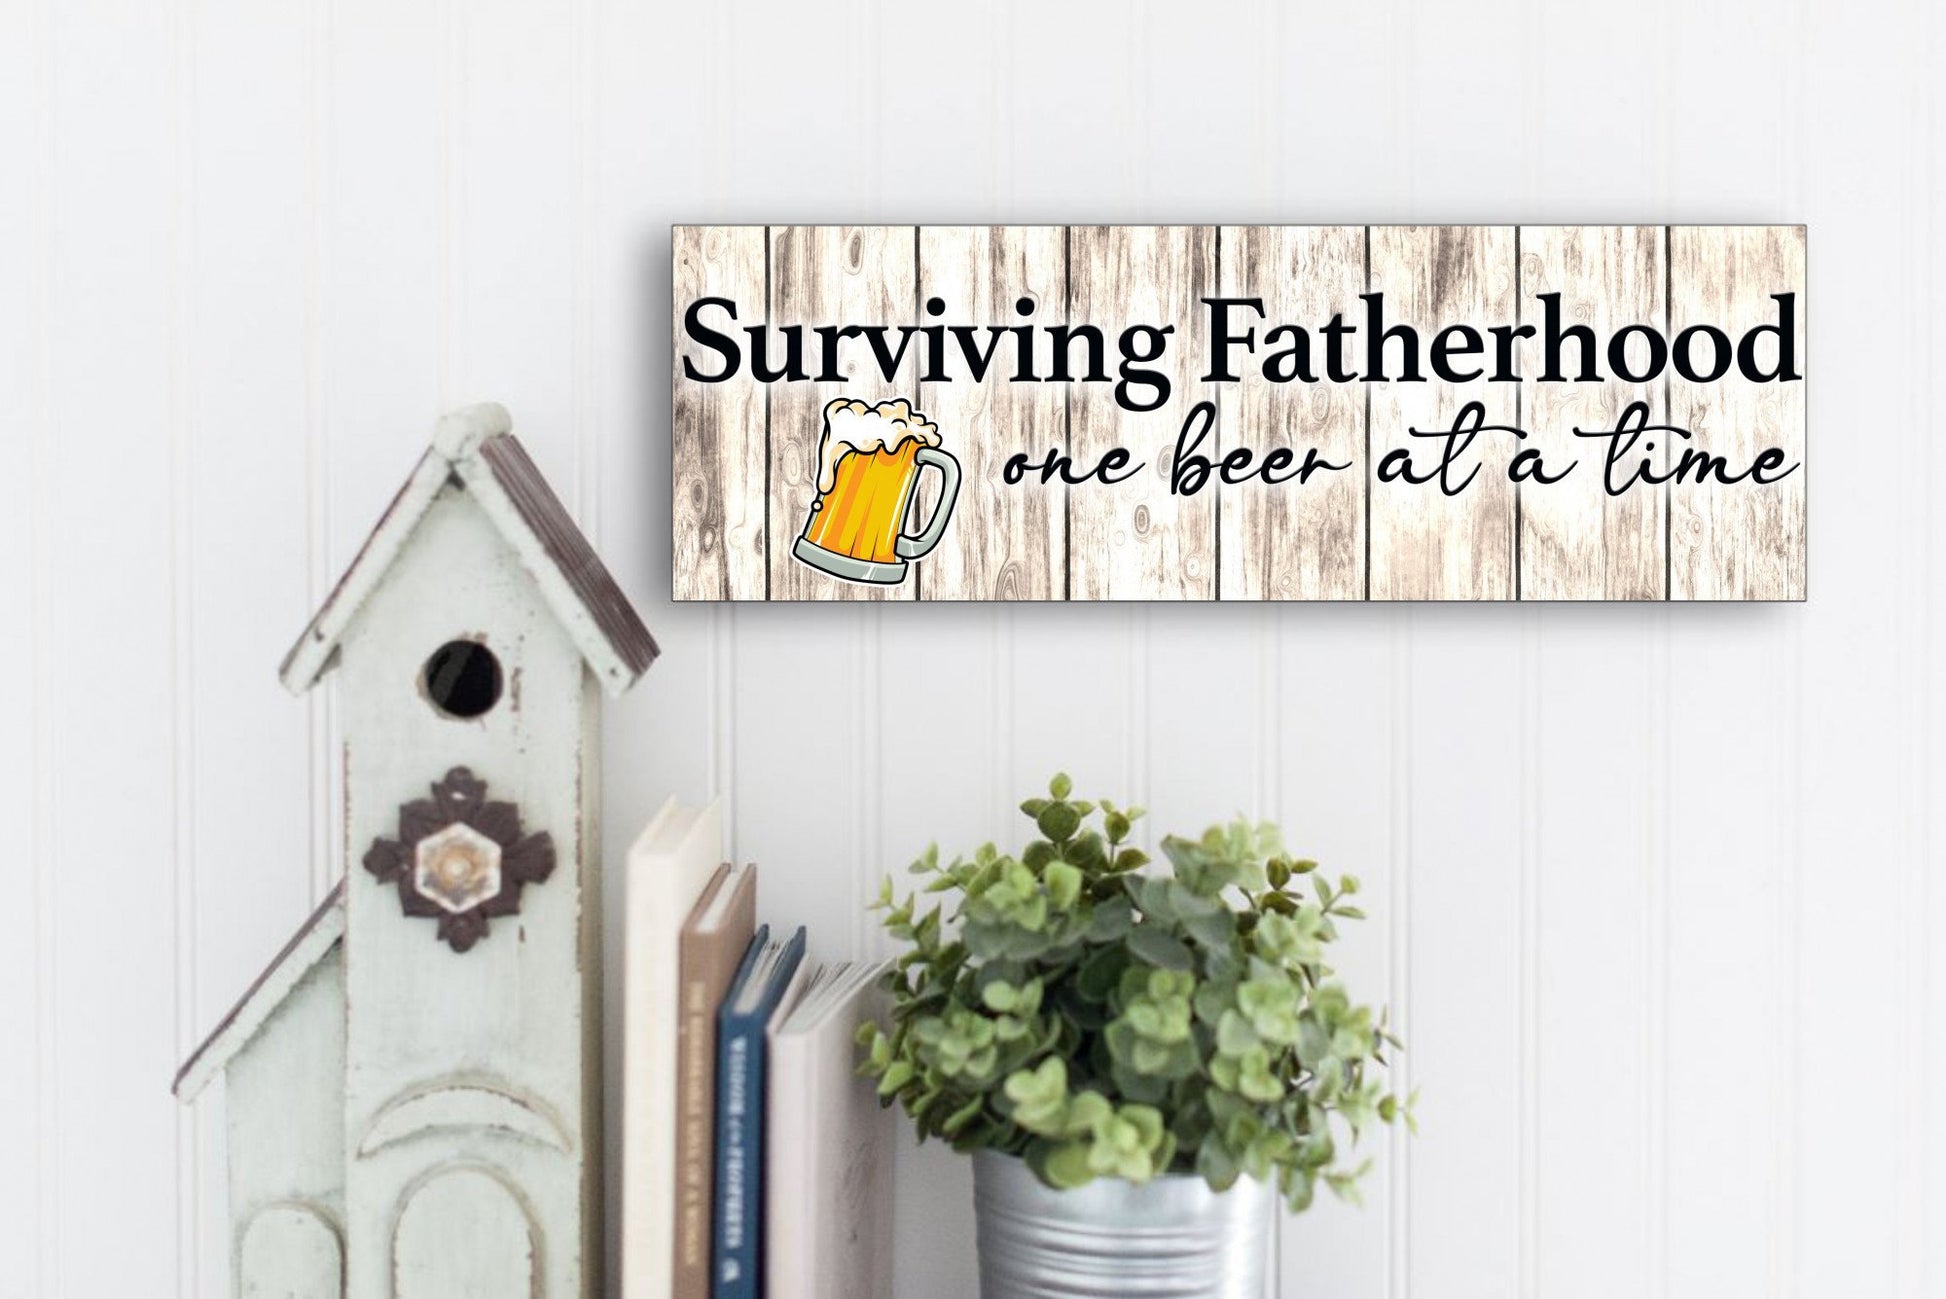 Surviving Fatherhood Sign | Funny Dad Gift | Beer For Dad | Dad's Man Cave | Wall Decor | Silly Dad Gift | Sarcastic Dad Gift | Father's Day